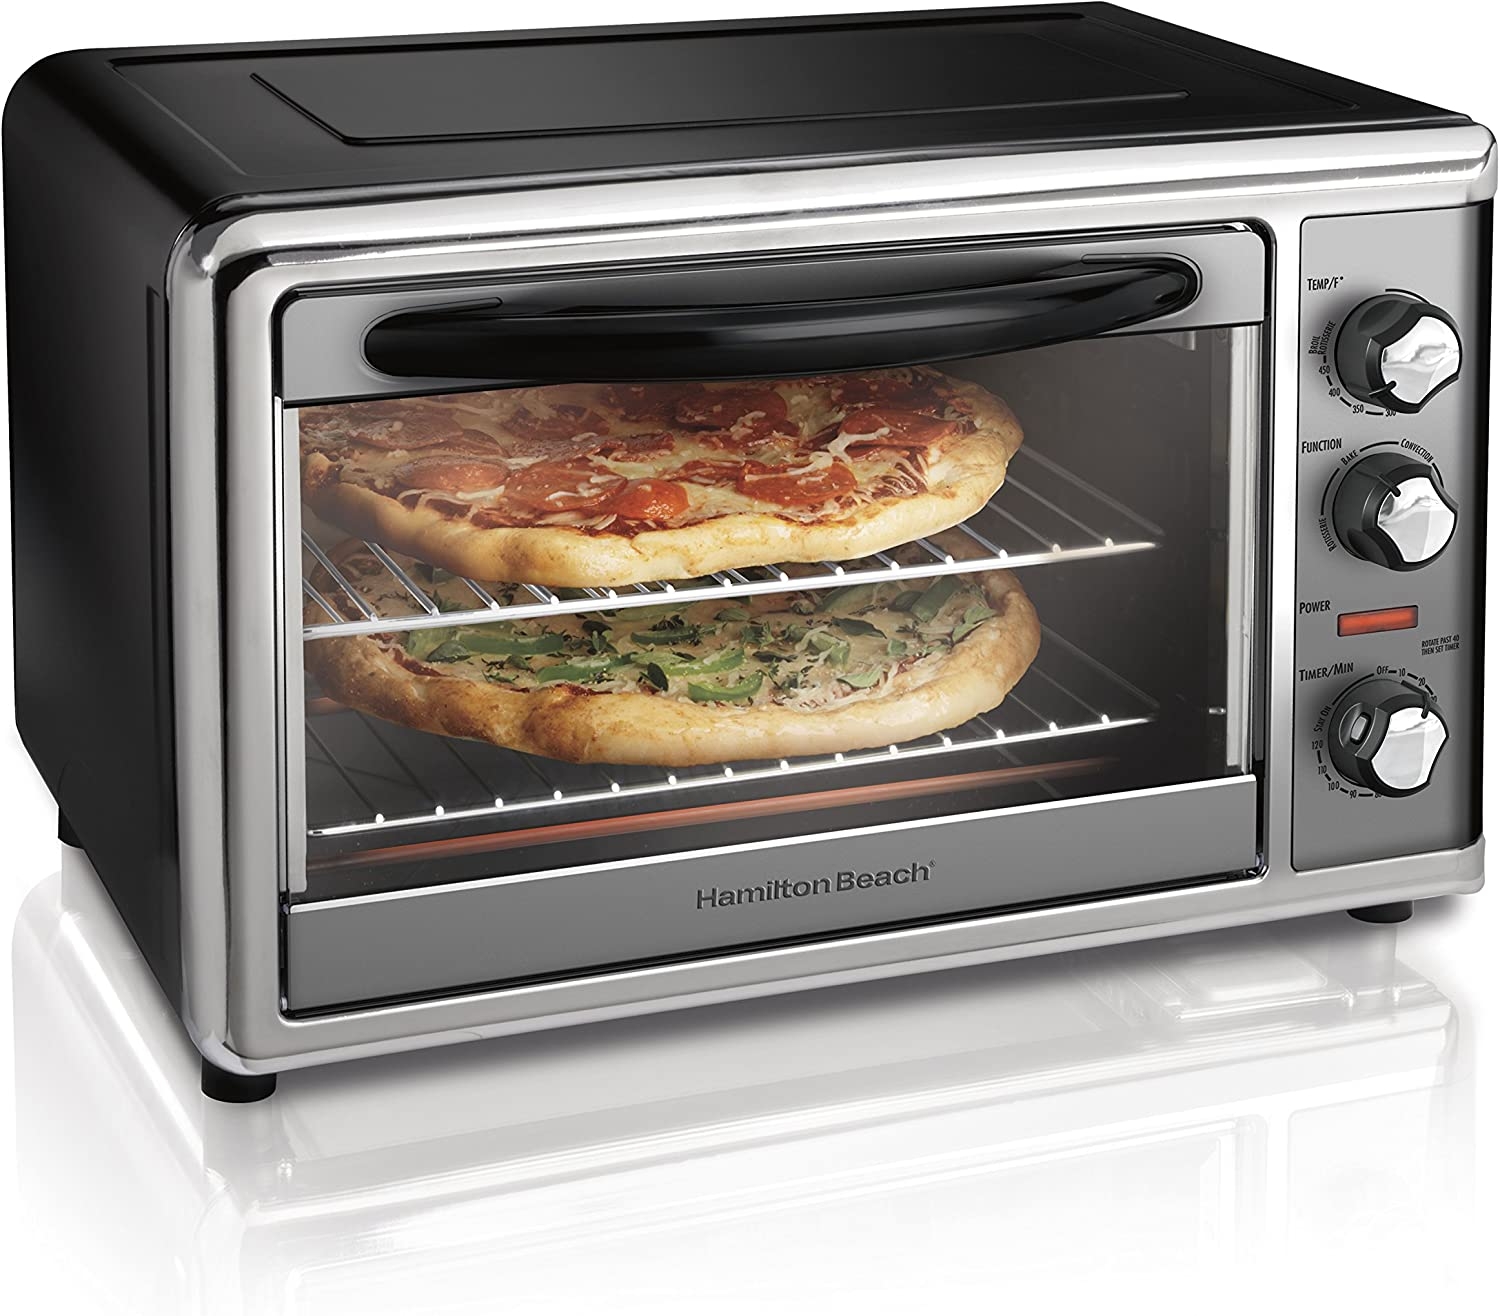 Hamilton Beach 31107D Convection Countertop Toaster Oven with Rotisserie, Extra-Large, Black and Stainless Import To Shop